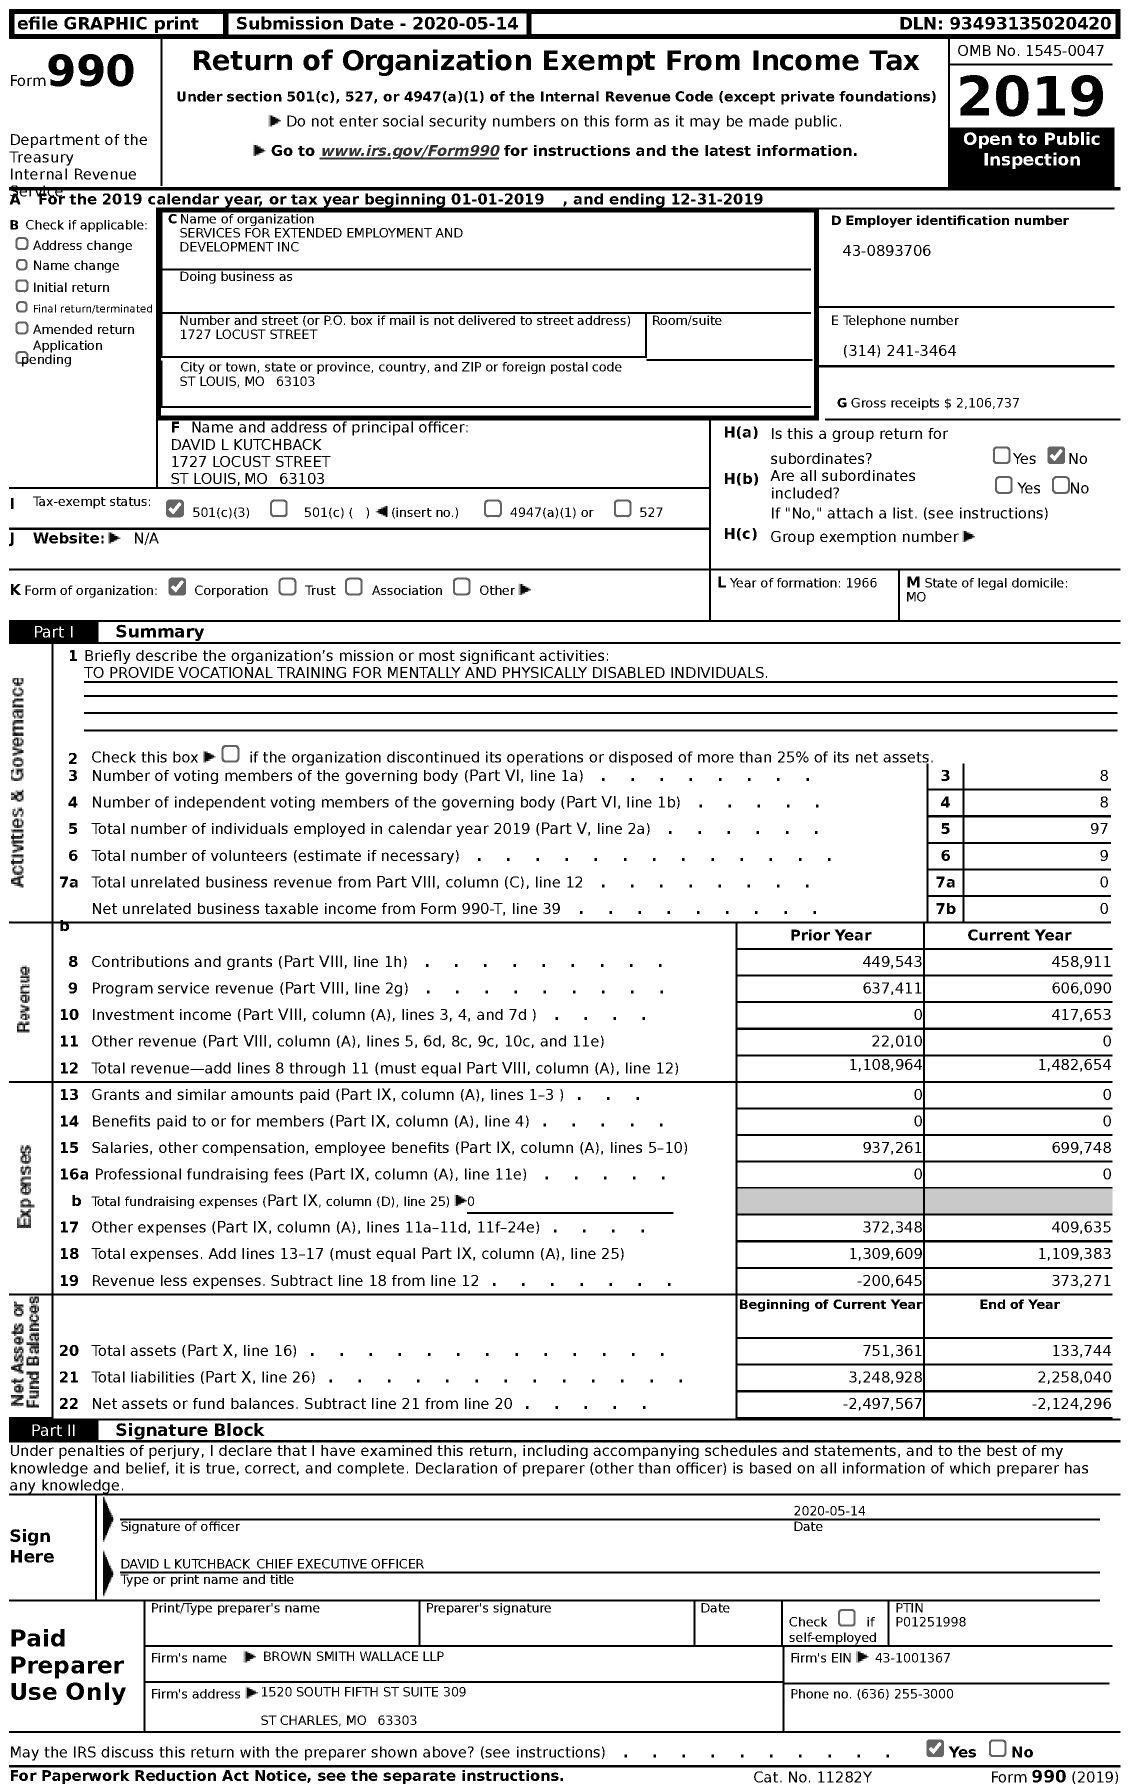 Image of first page of 2019 Form 990 for Services for Extended Employment and Development